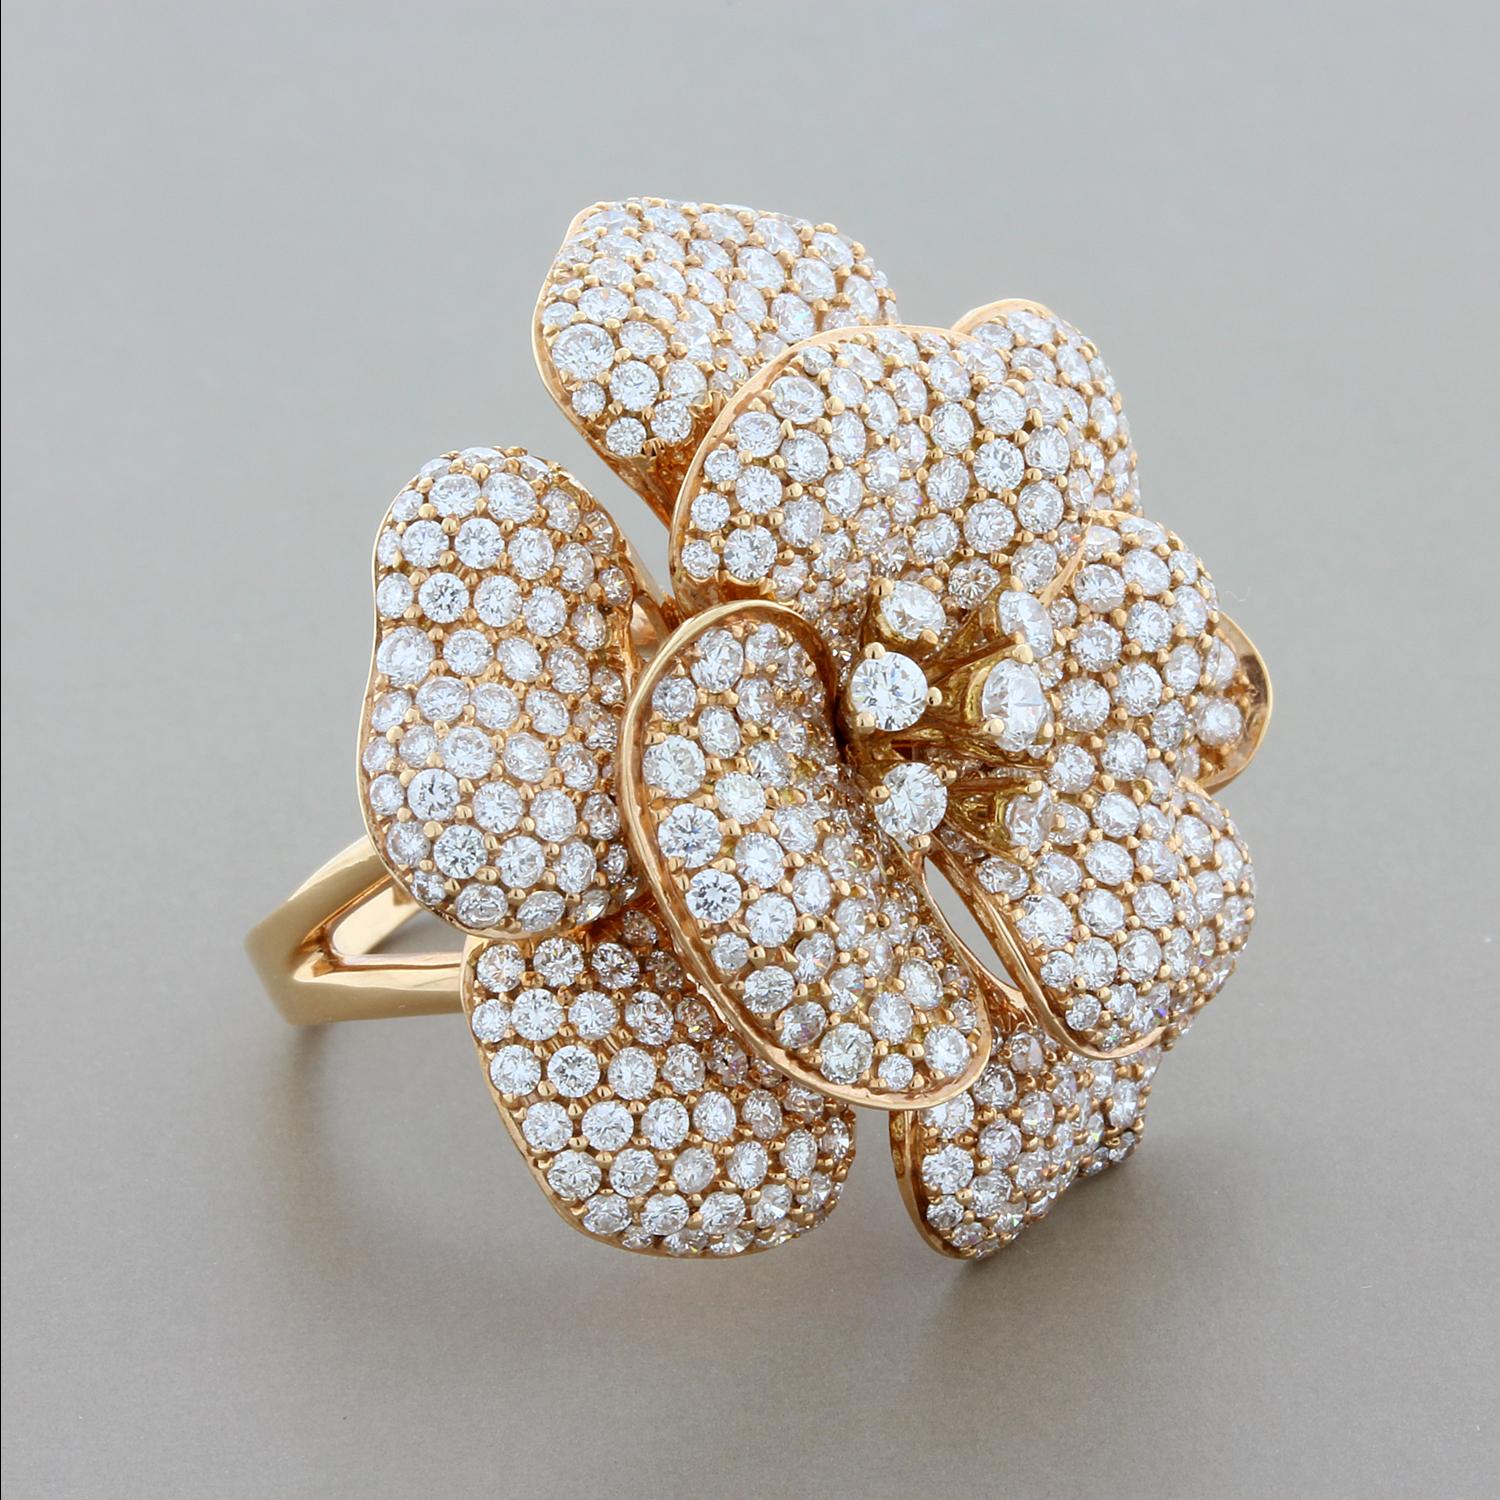 This ring features 6.11 carats of VS clarity colorless diamond pavé. Beautiful modern flower design, each petal is covered with diamonds, set in 18K rose gold.

Ring Size 6
